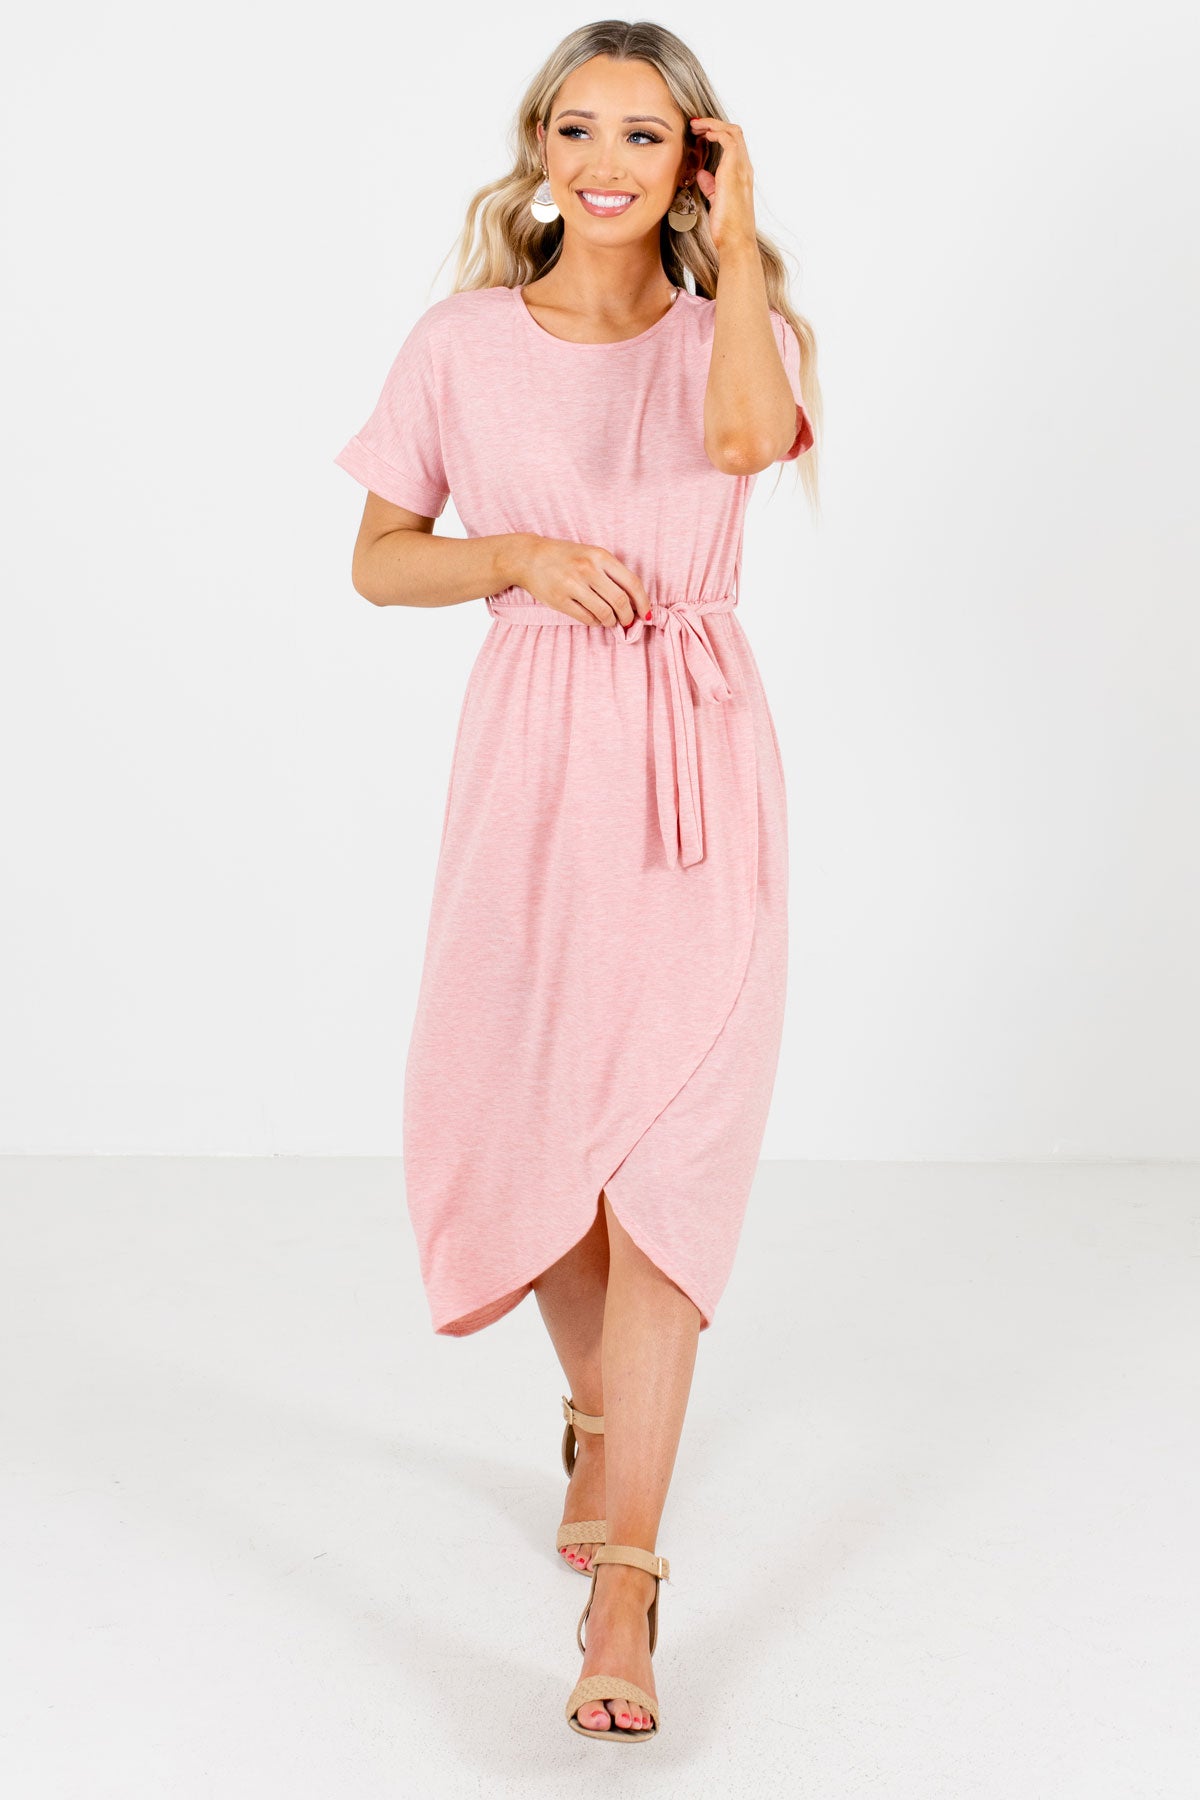 Pink Cute and Comfortable Boutique Knee-Length Dresses for Women